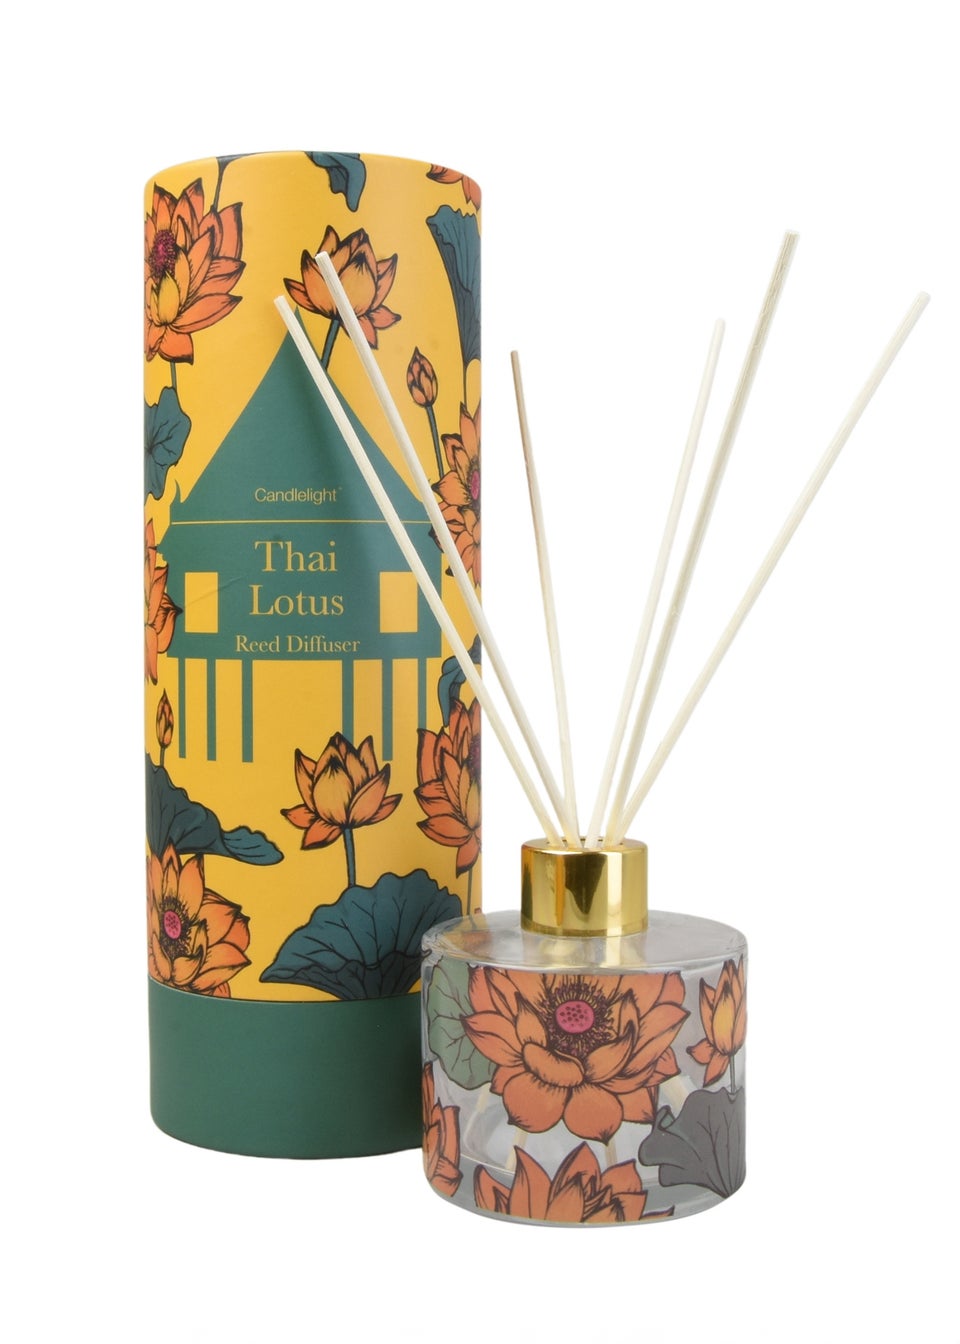 Candlelight Thai Lotus Reed Diffuser (150ml)